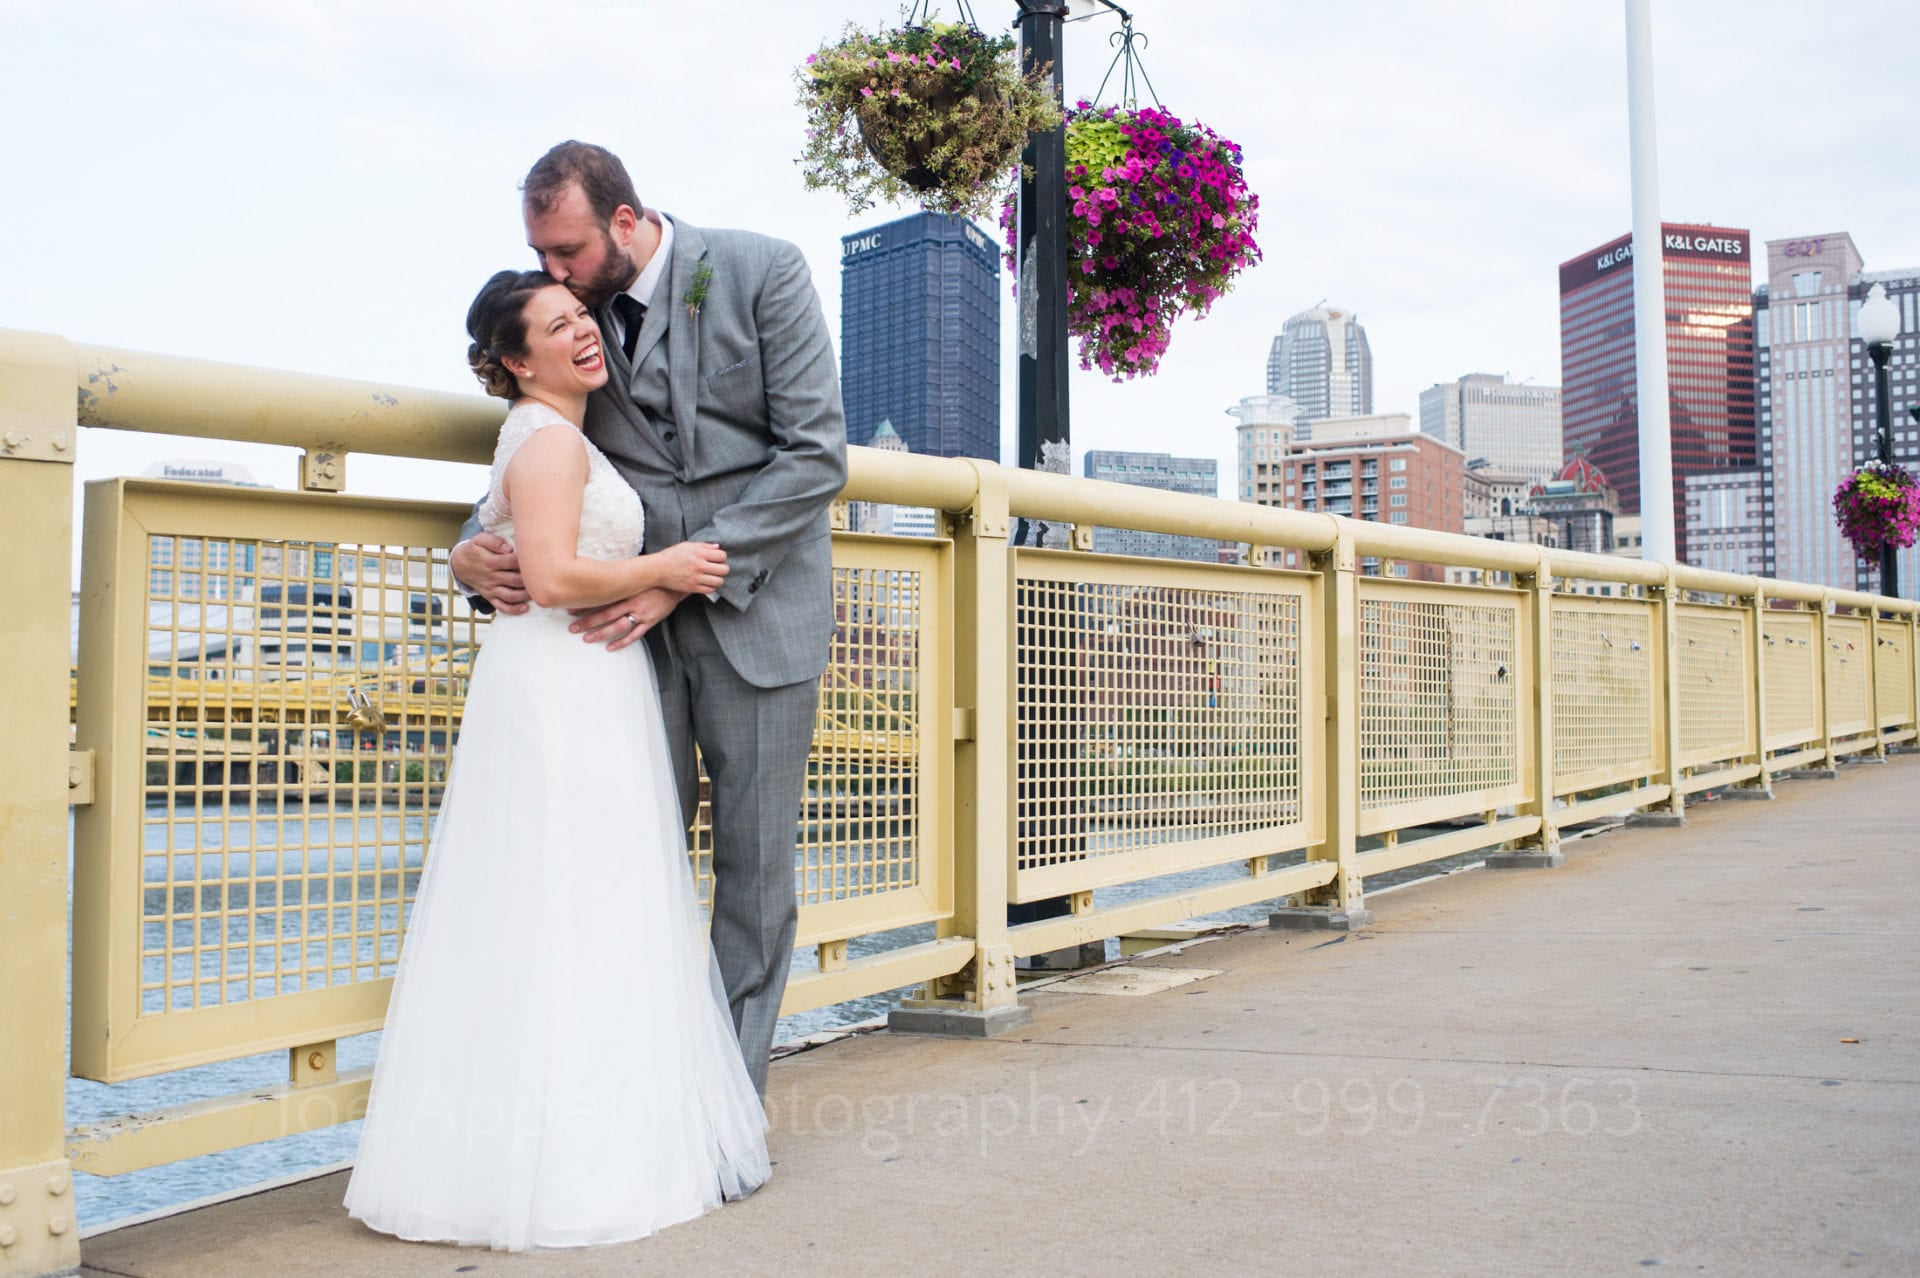 A groom kisses his bride on the forehead as they stand on the walkway of the Roberto Clemente Bridge with the buildings of downtown Pittsburgh behind them.